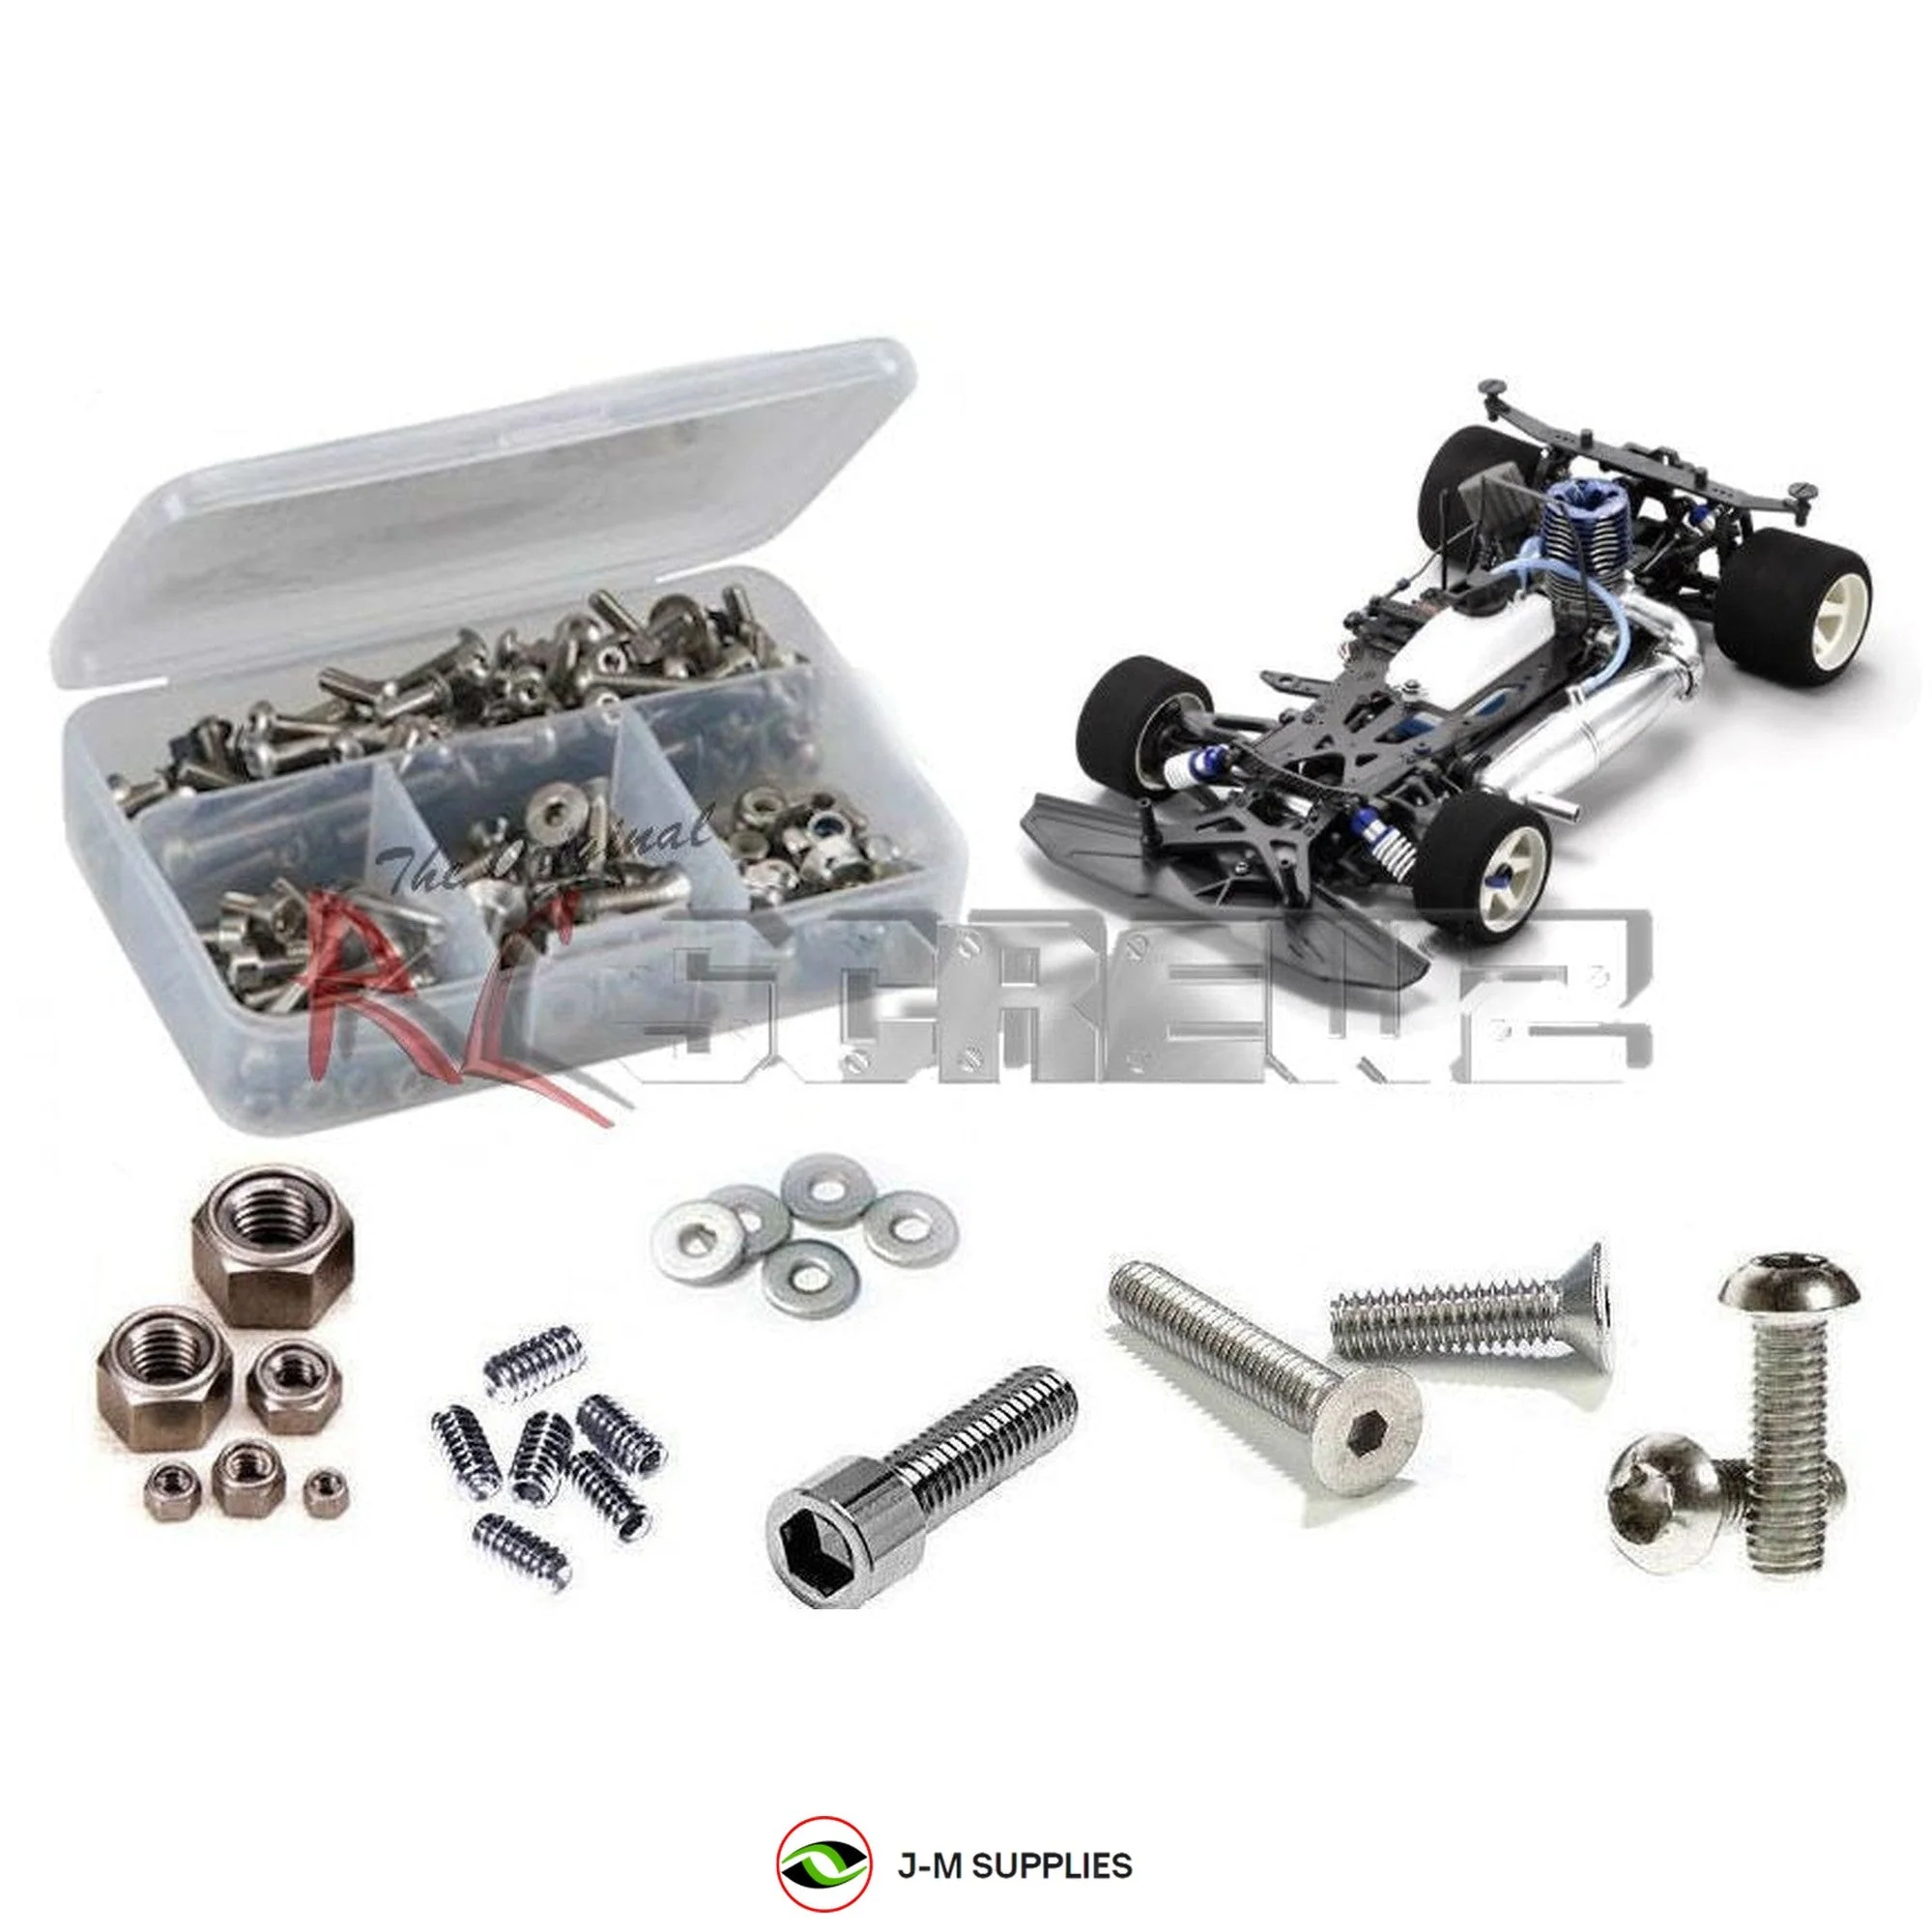 RCScrewZ Stainless Screw Kit+ kyo052 for Kyosho Evolva 2003 (#31283) RC Car - Picture 1 of 12